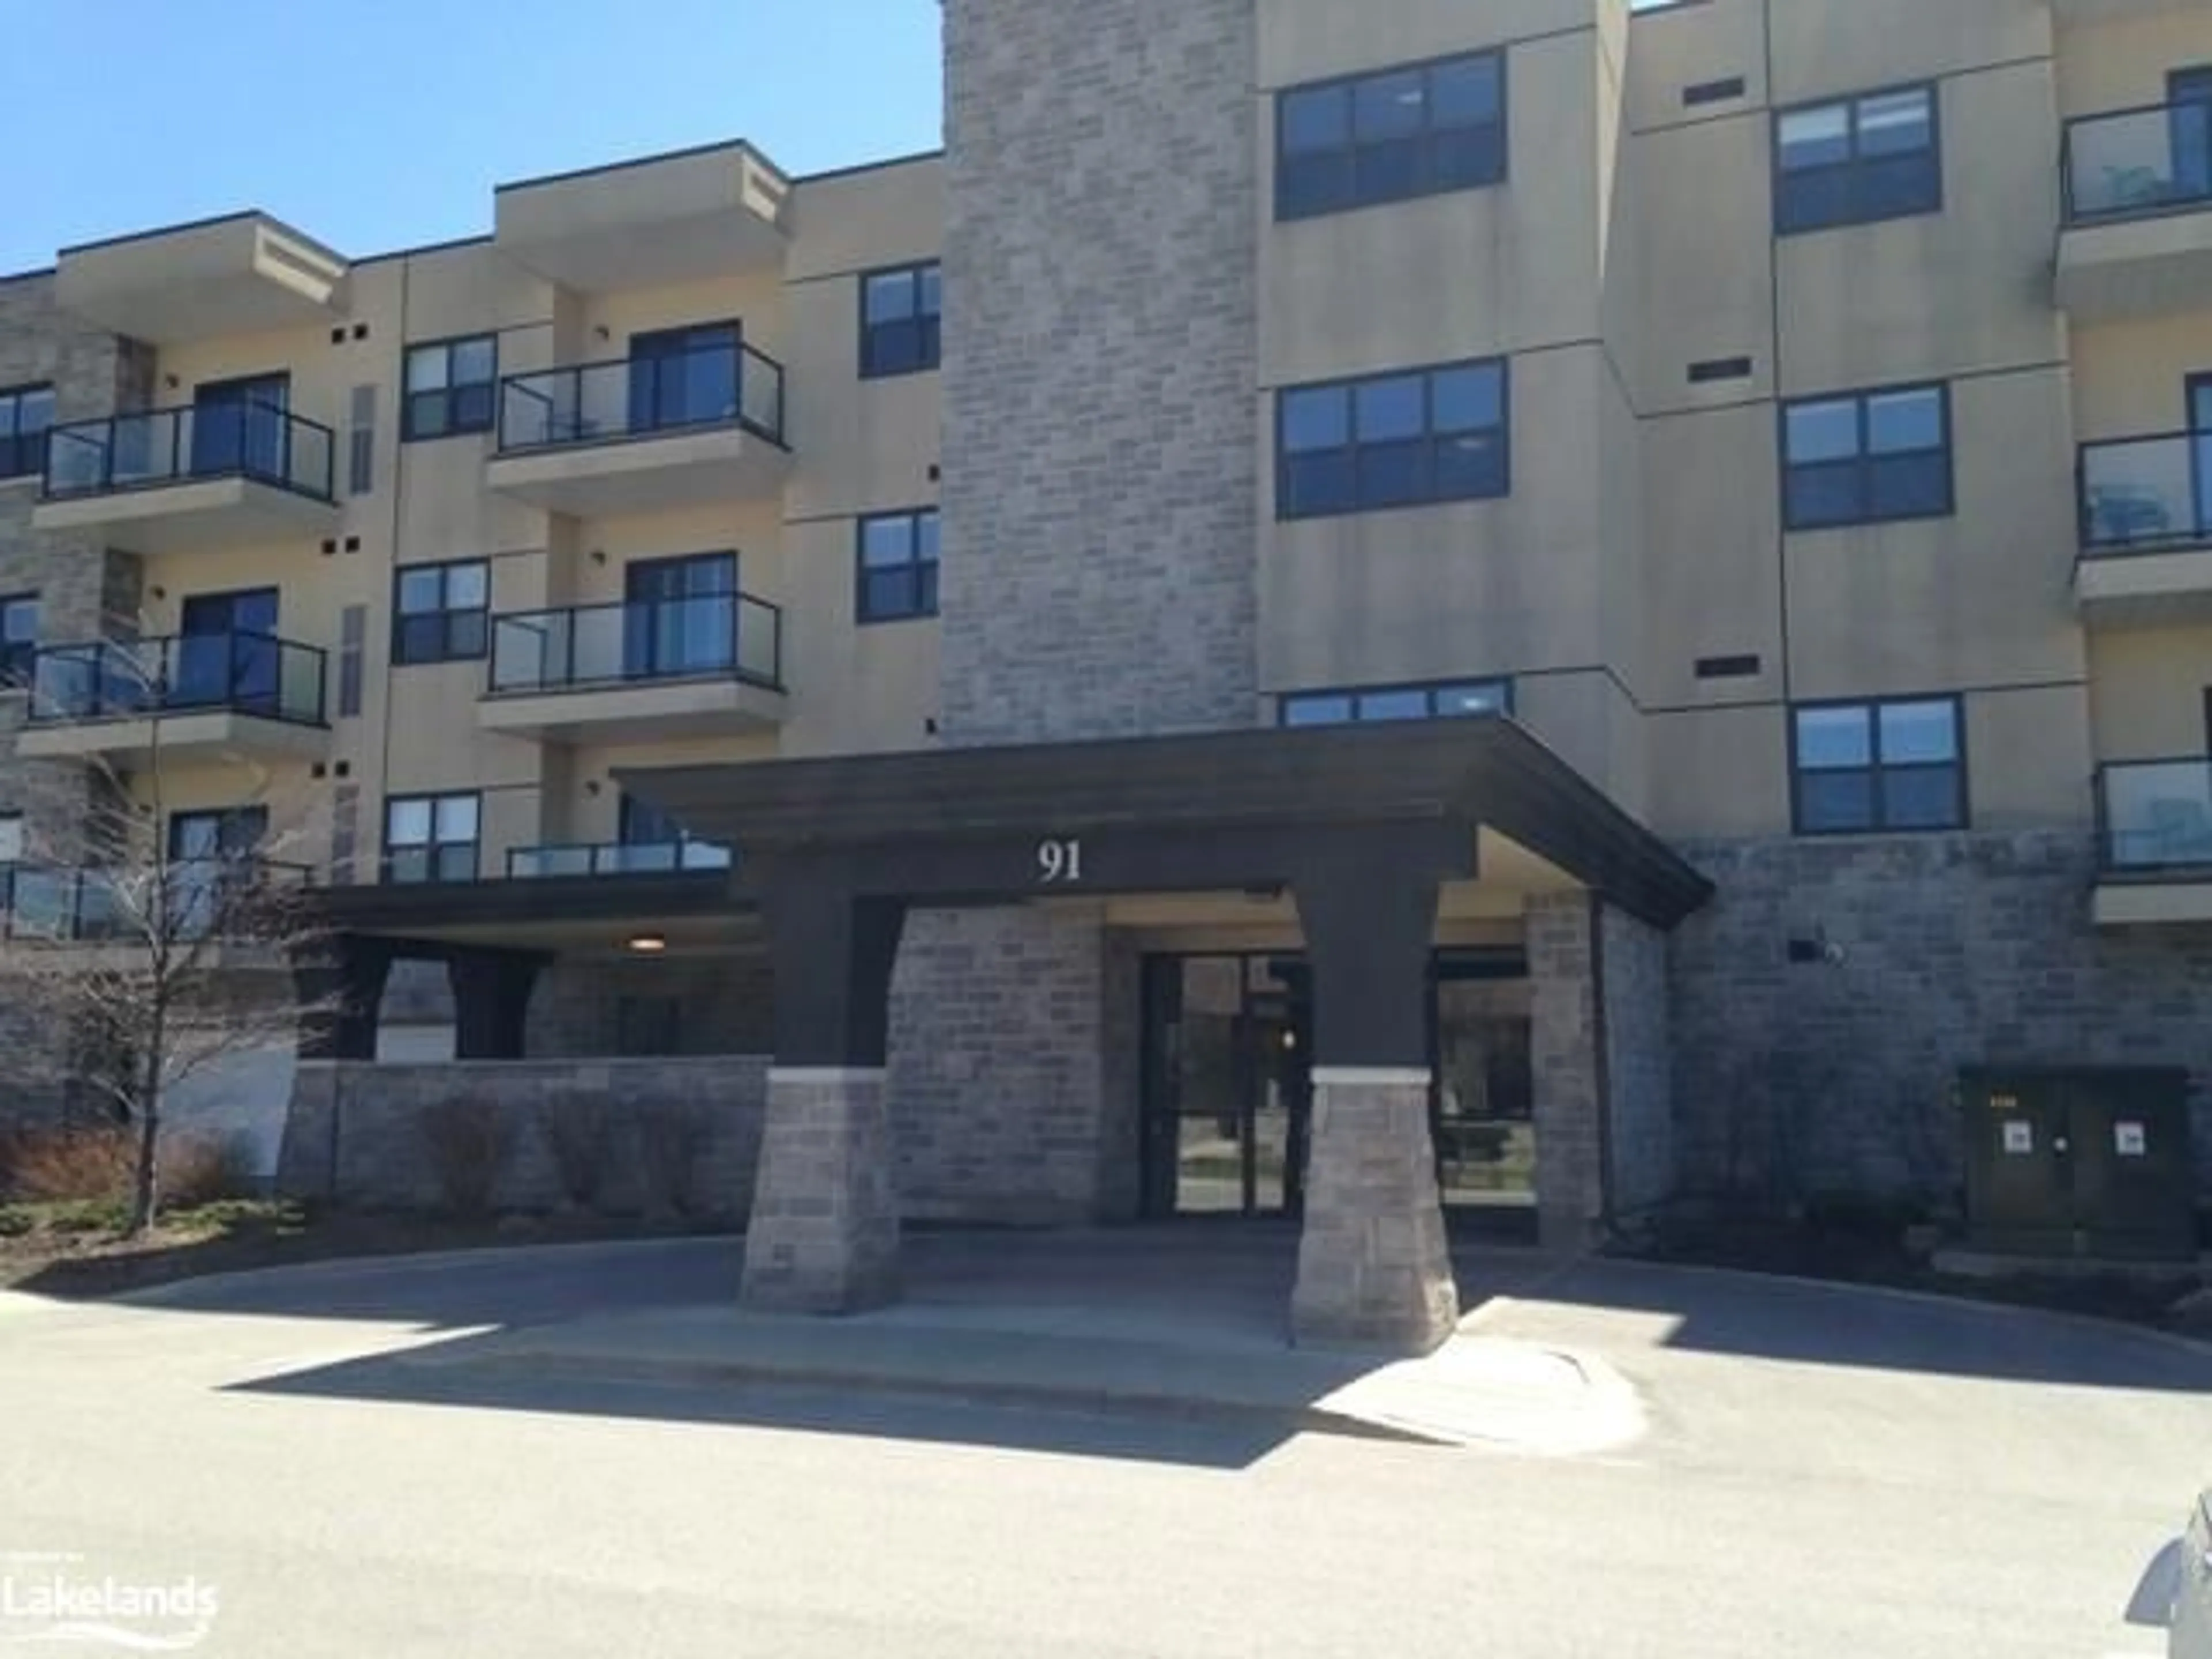 A pic from exterior of the house or condo for 91 Raglan St #206, Collingwood Ontario L9Y 0B2